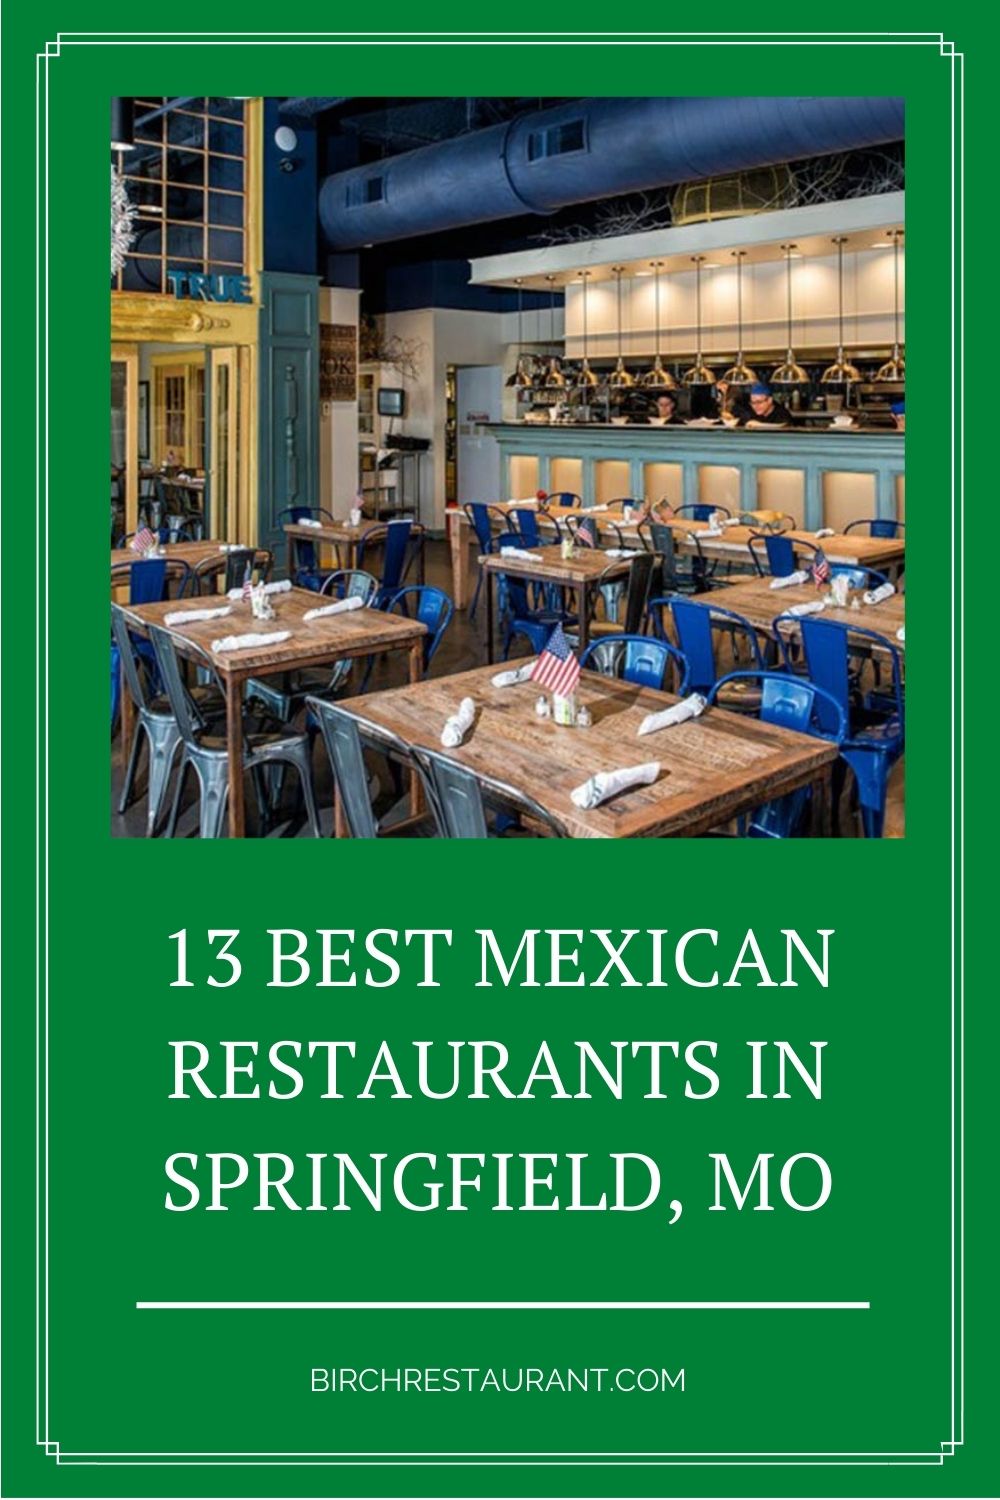 Best Mexican Restaurants in Springfield, MO